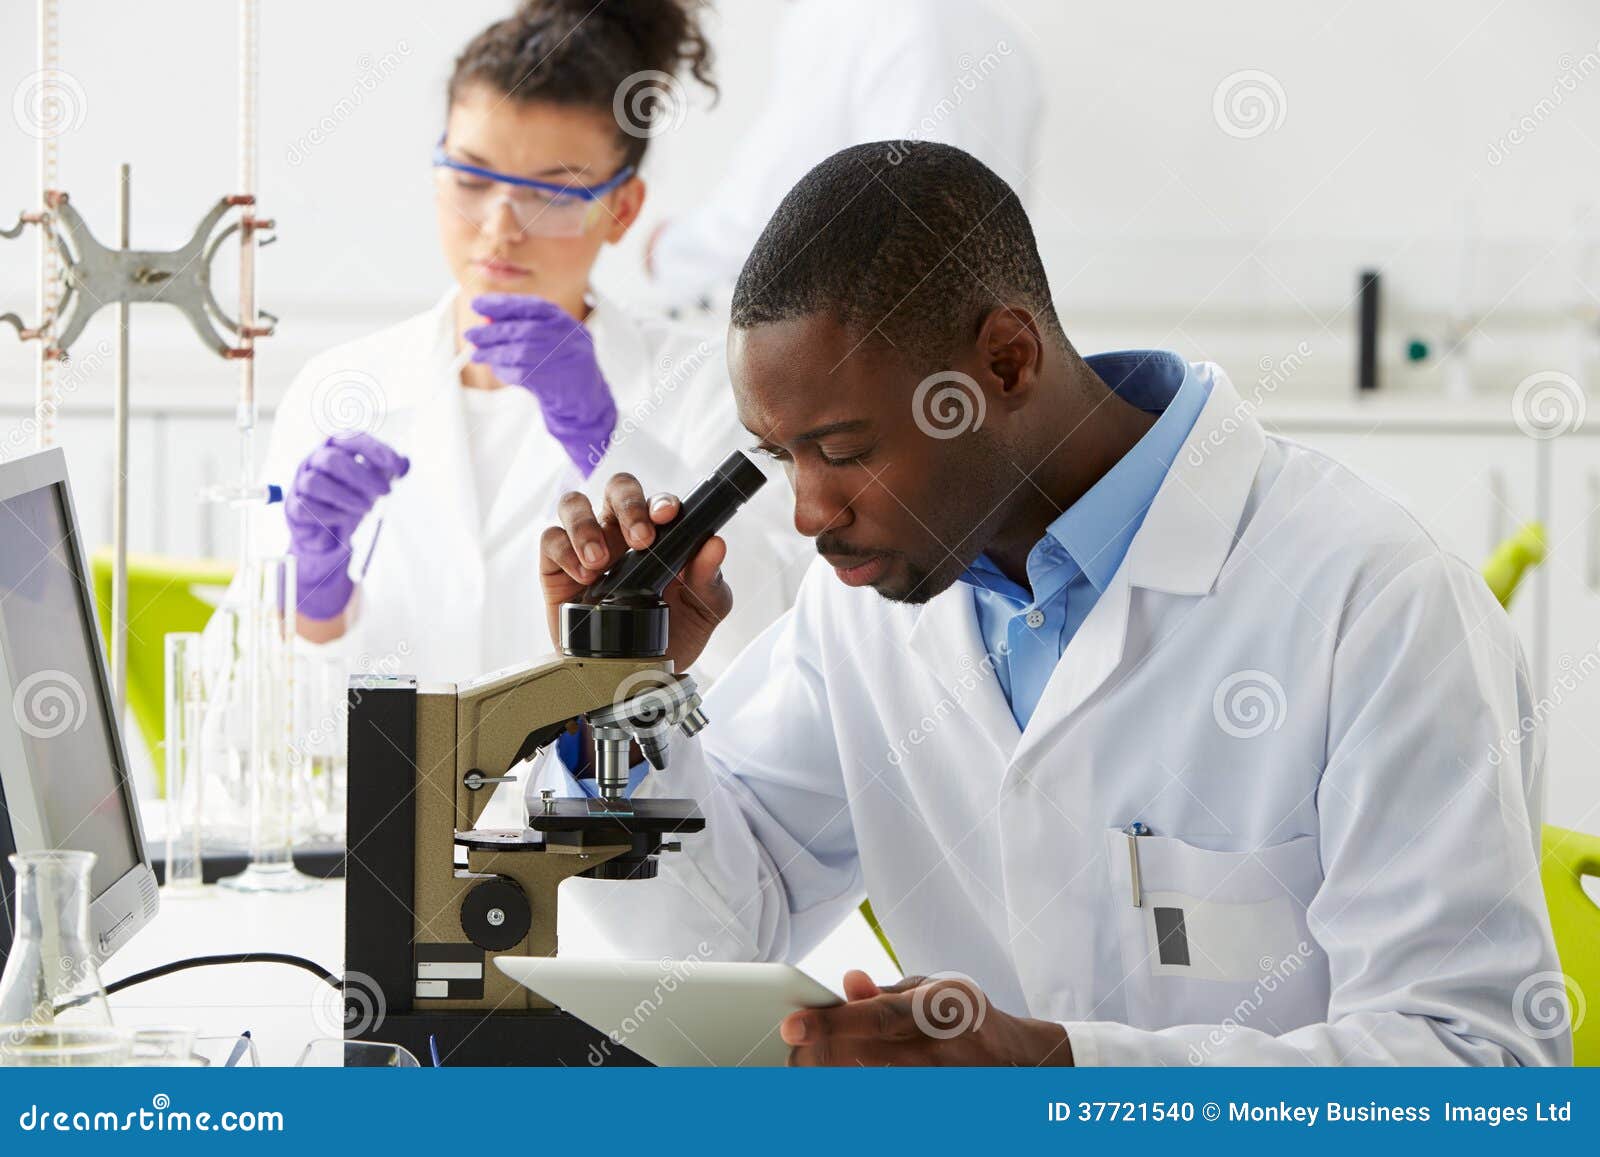 technicians carrying out research in laboratory